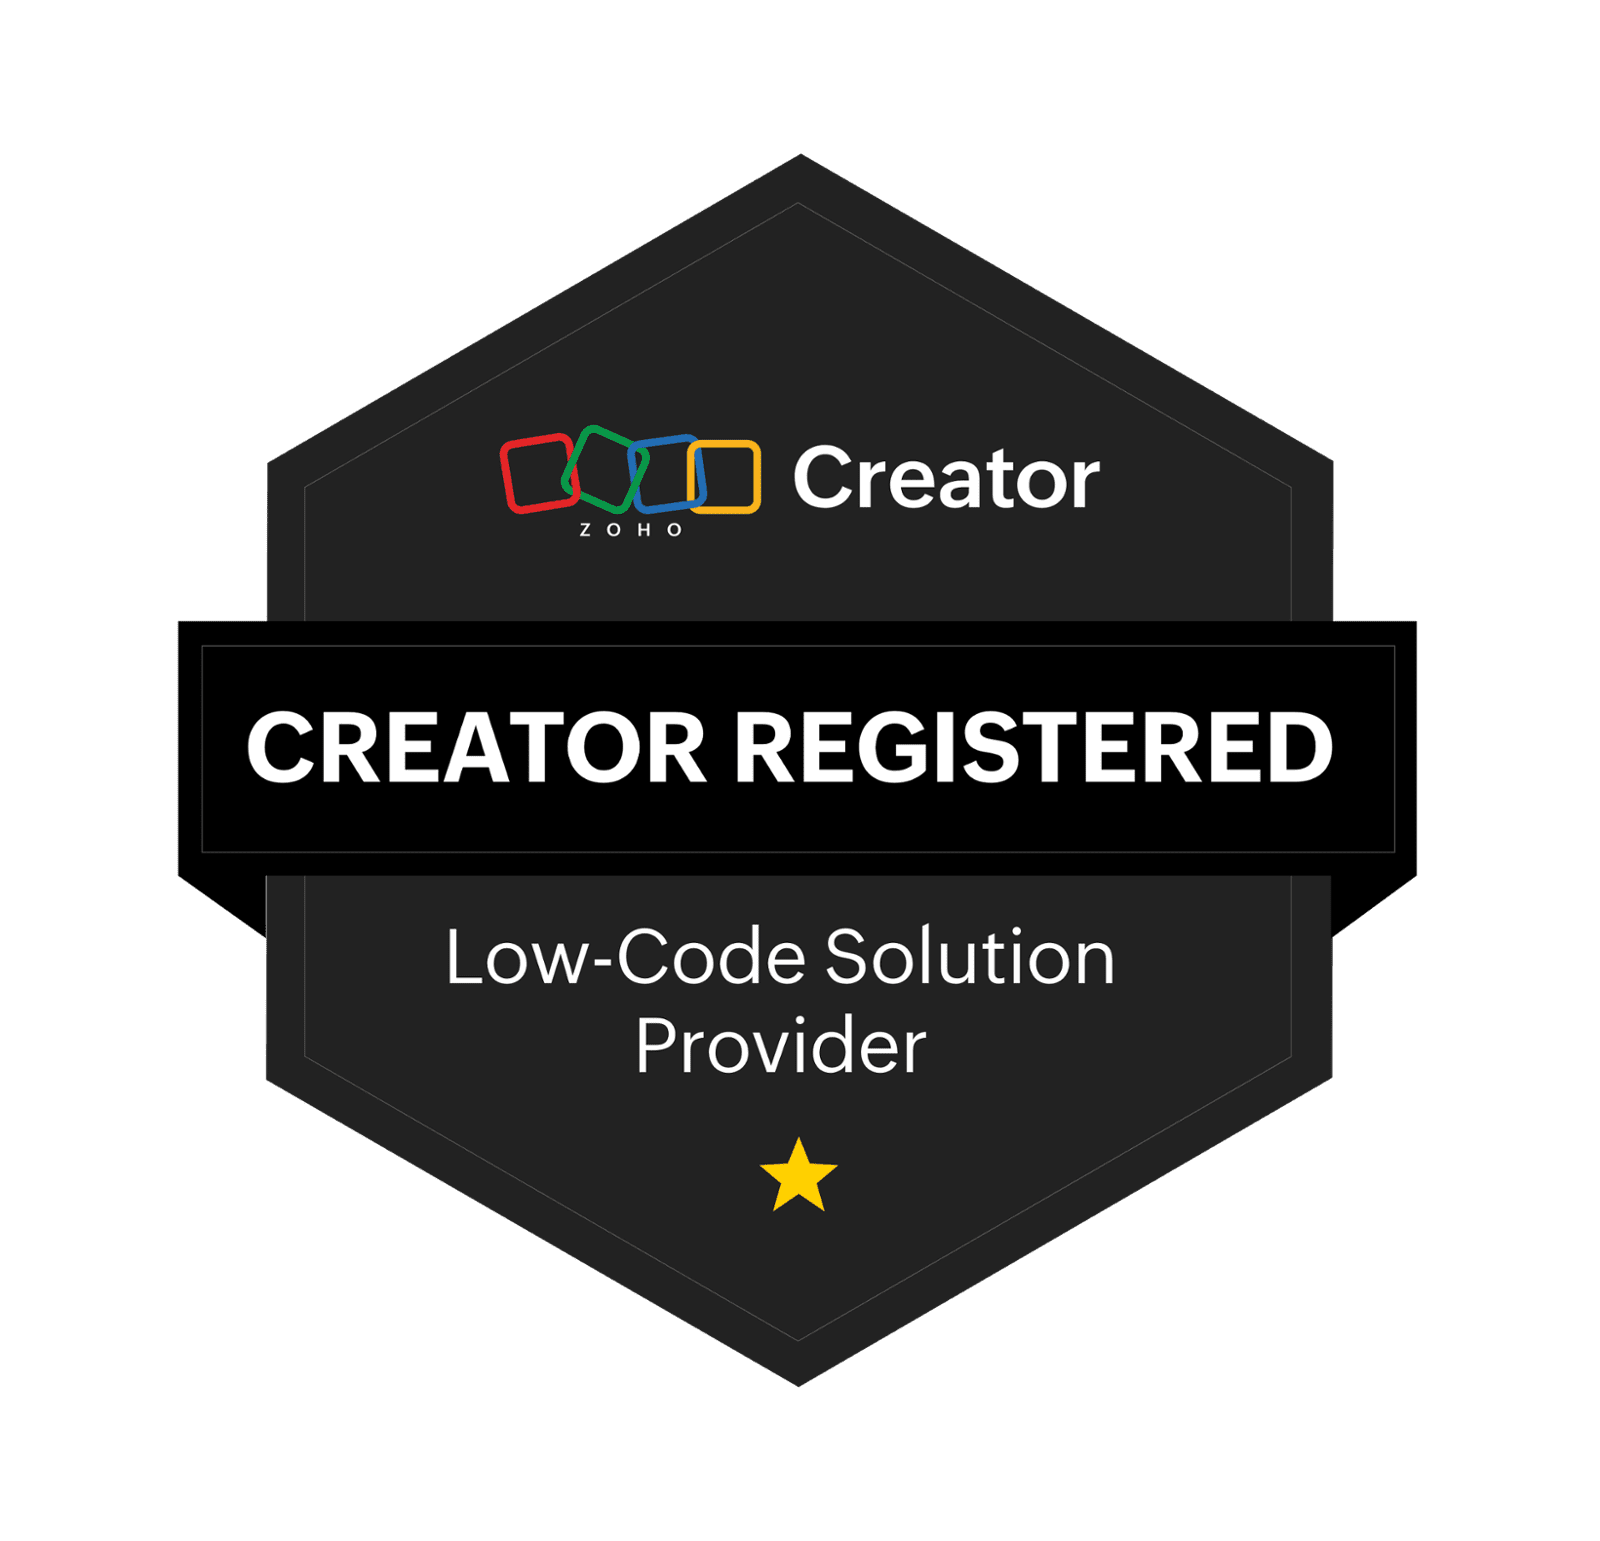 Certified Zoho Creator Consultants in South Africa